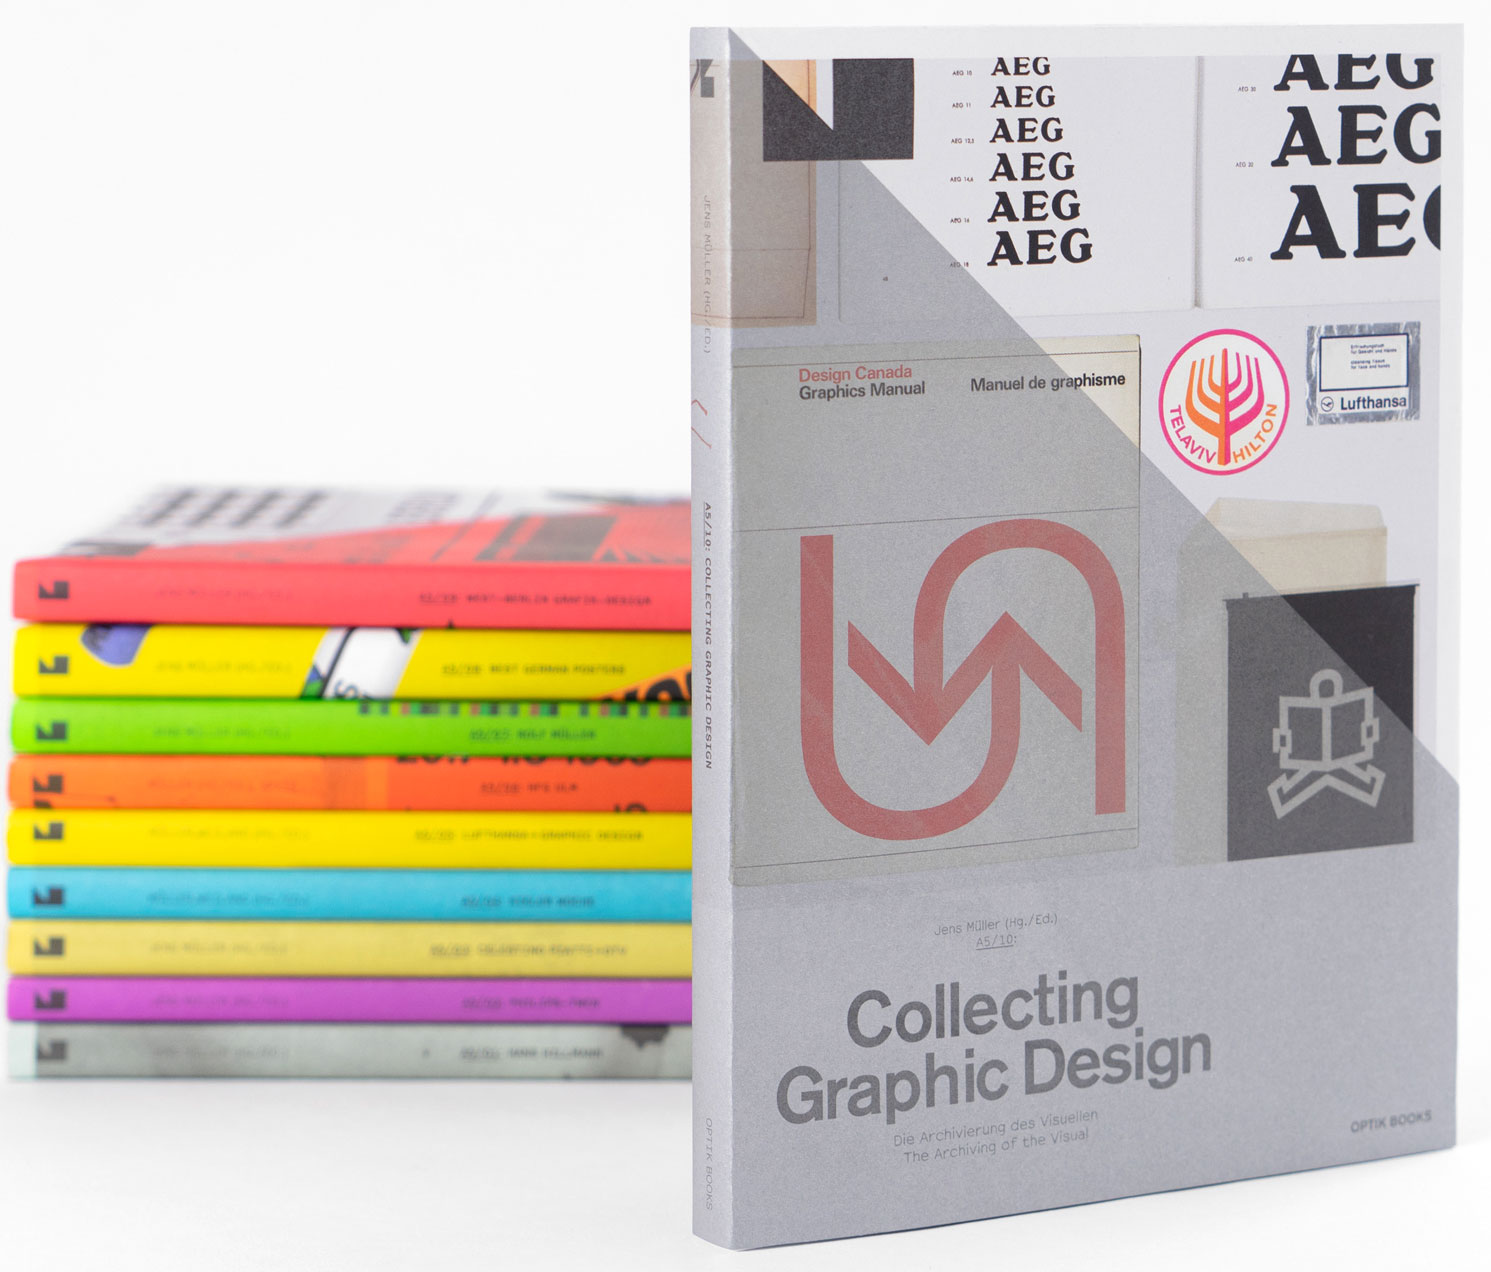 A5/10: Collecting Graphic Design — The Archiving of the Visual